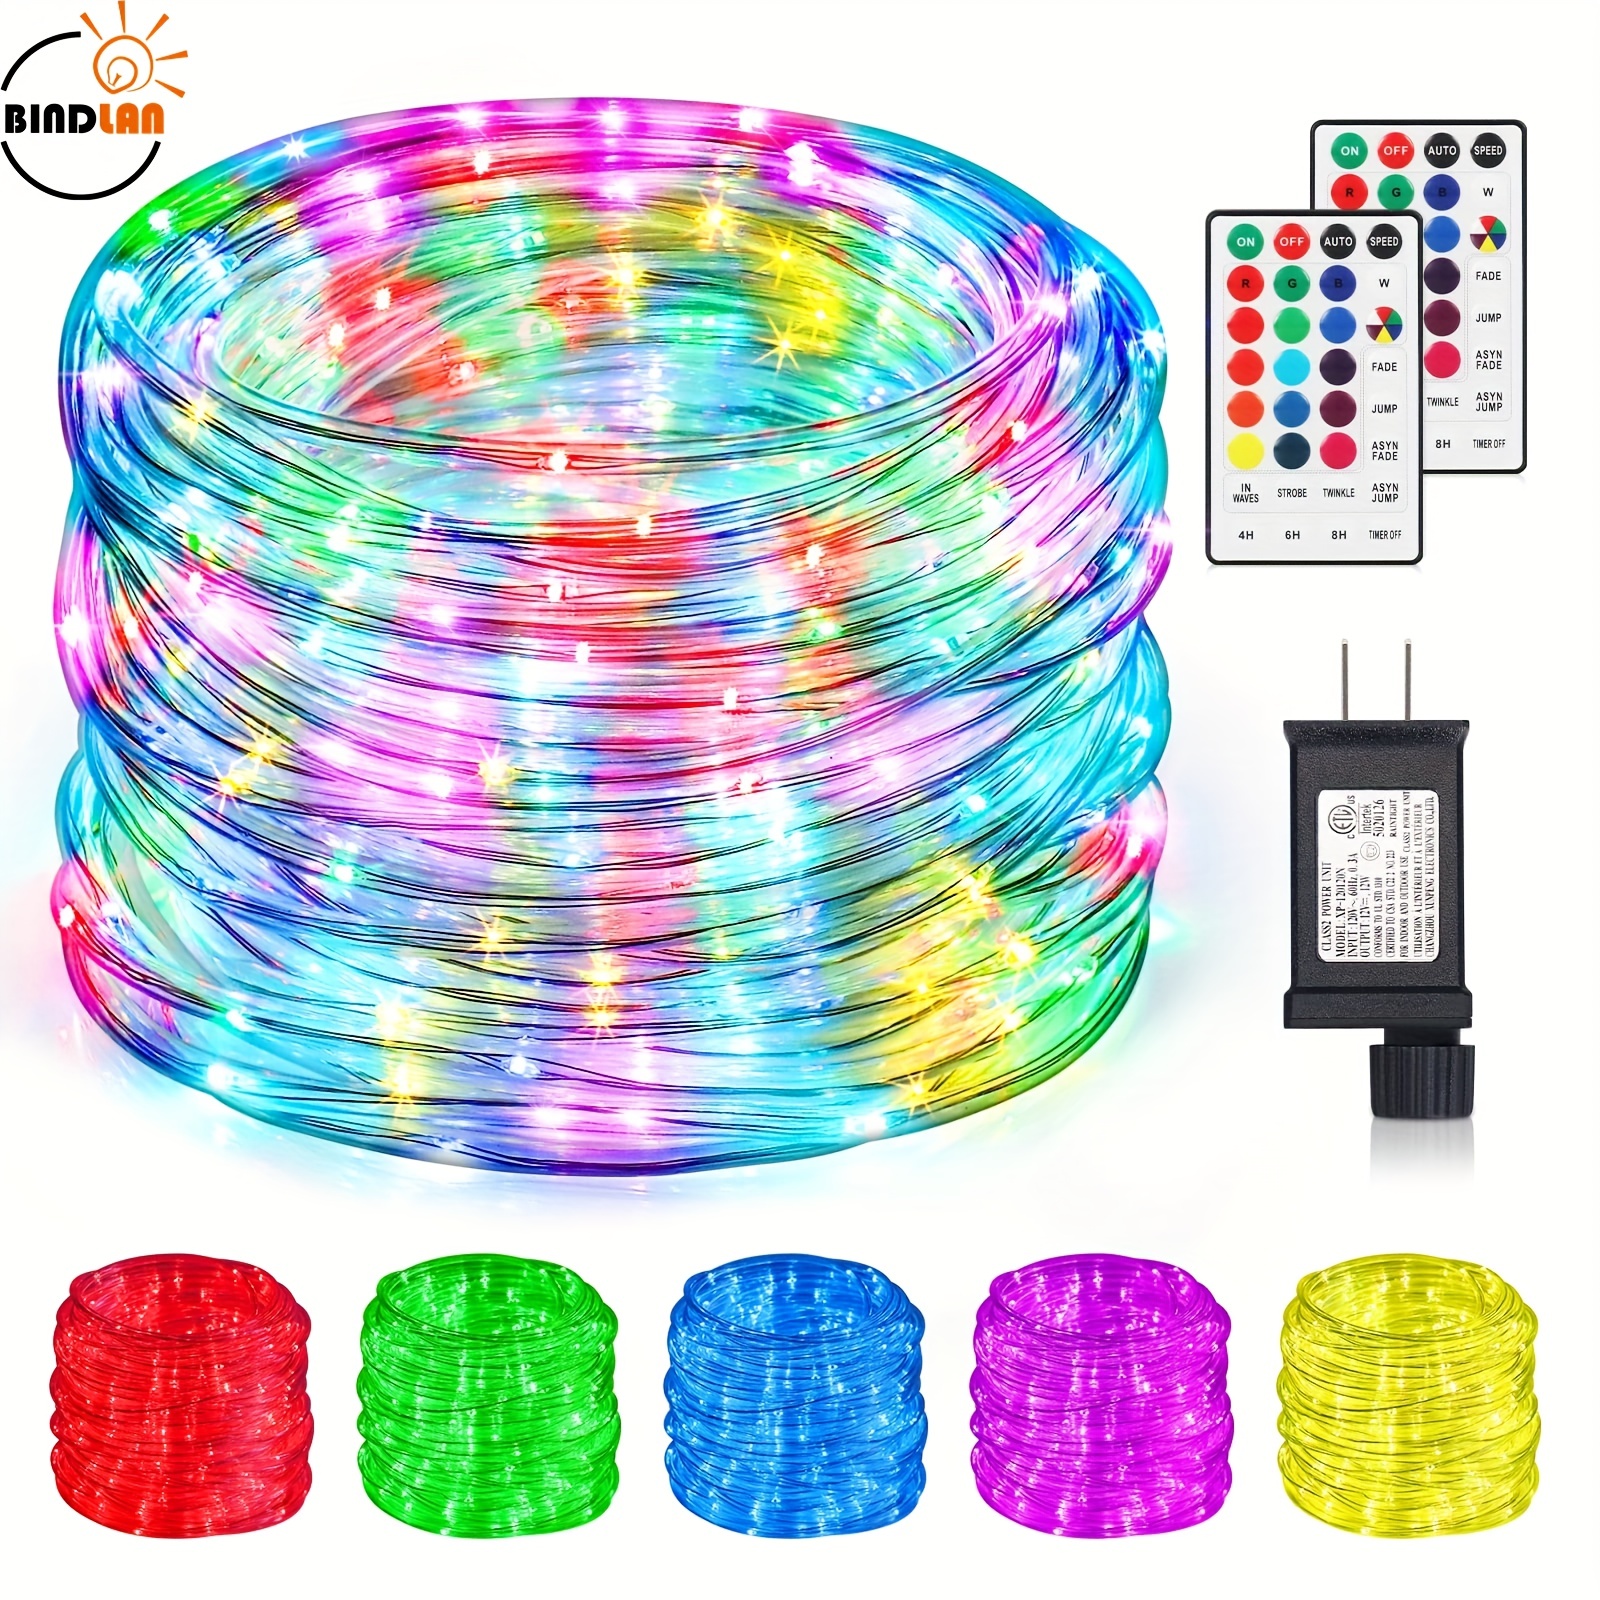 1pc 18 Colors Waterproof 99ft 300 Led String Lights With Remote